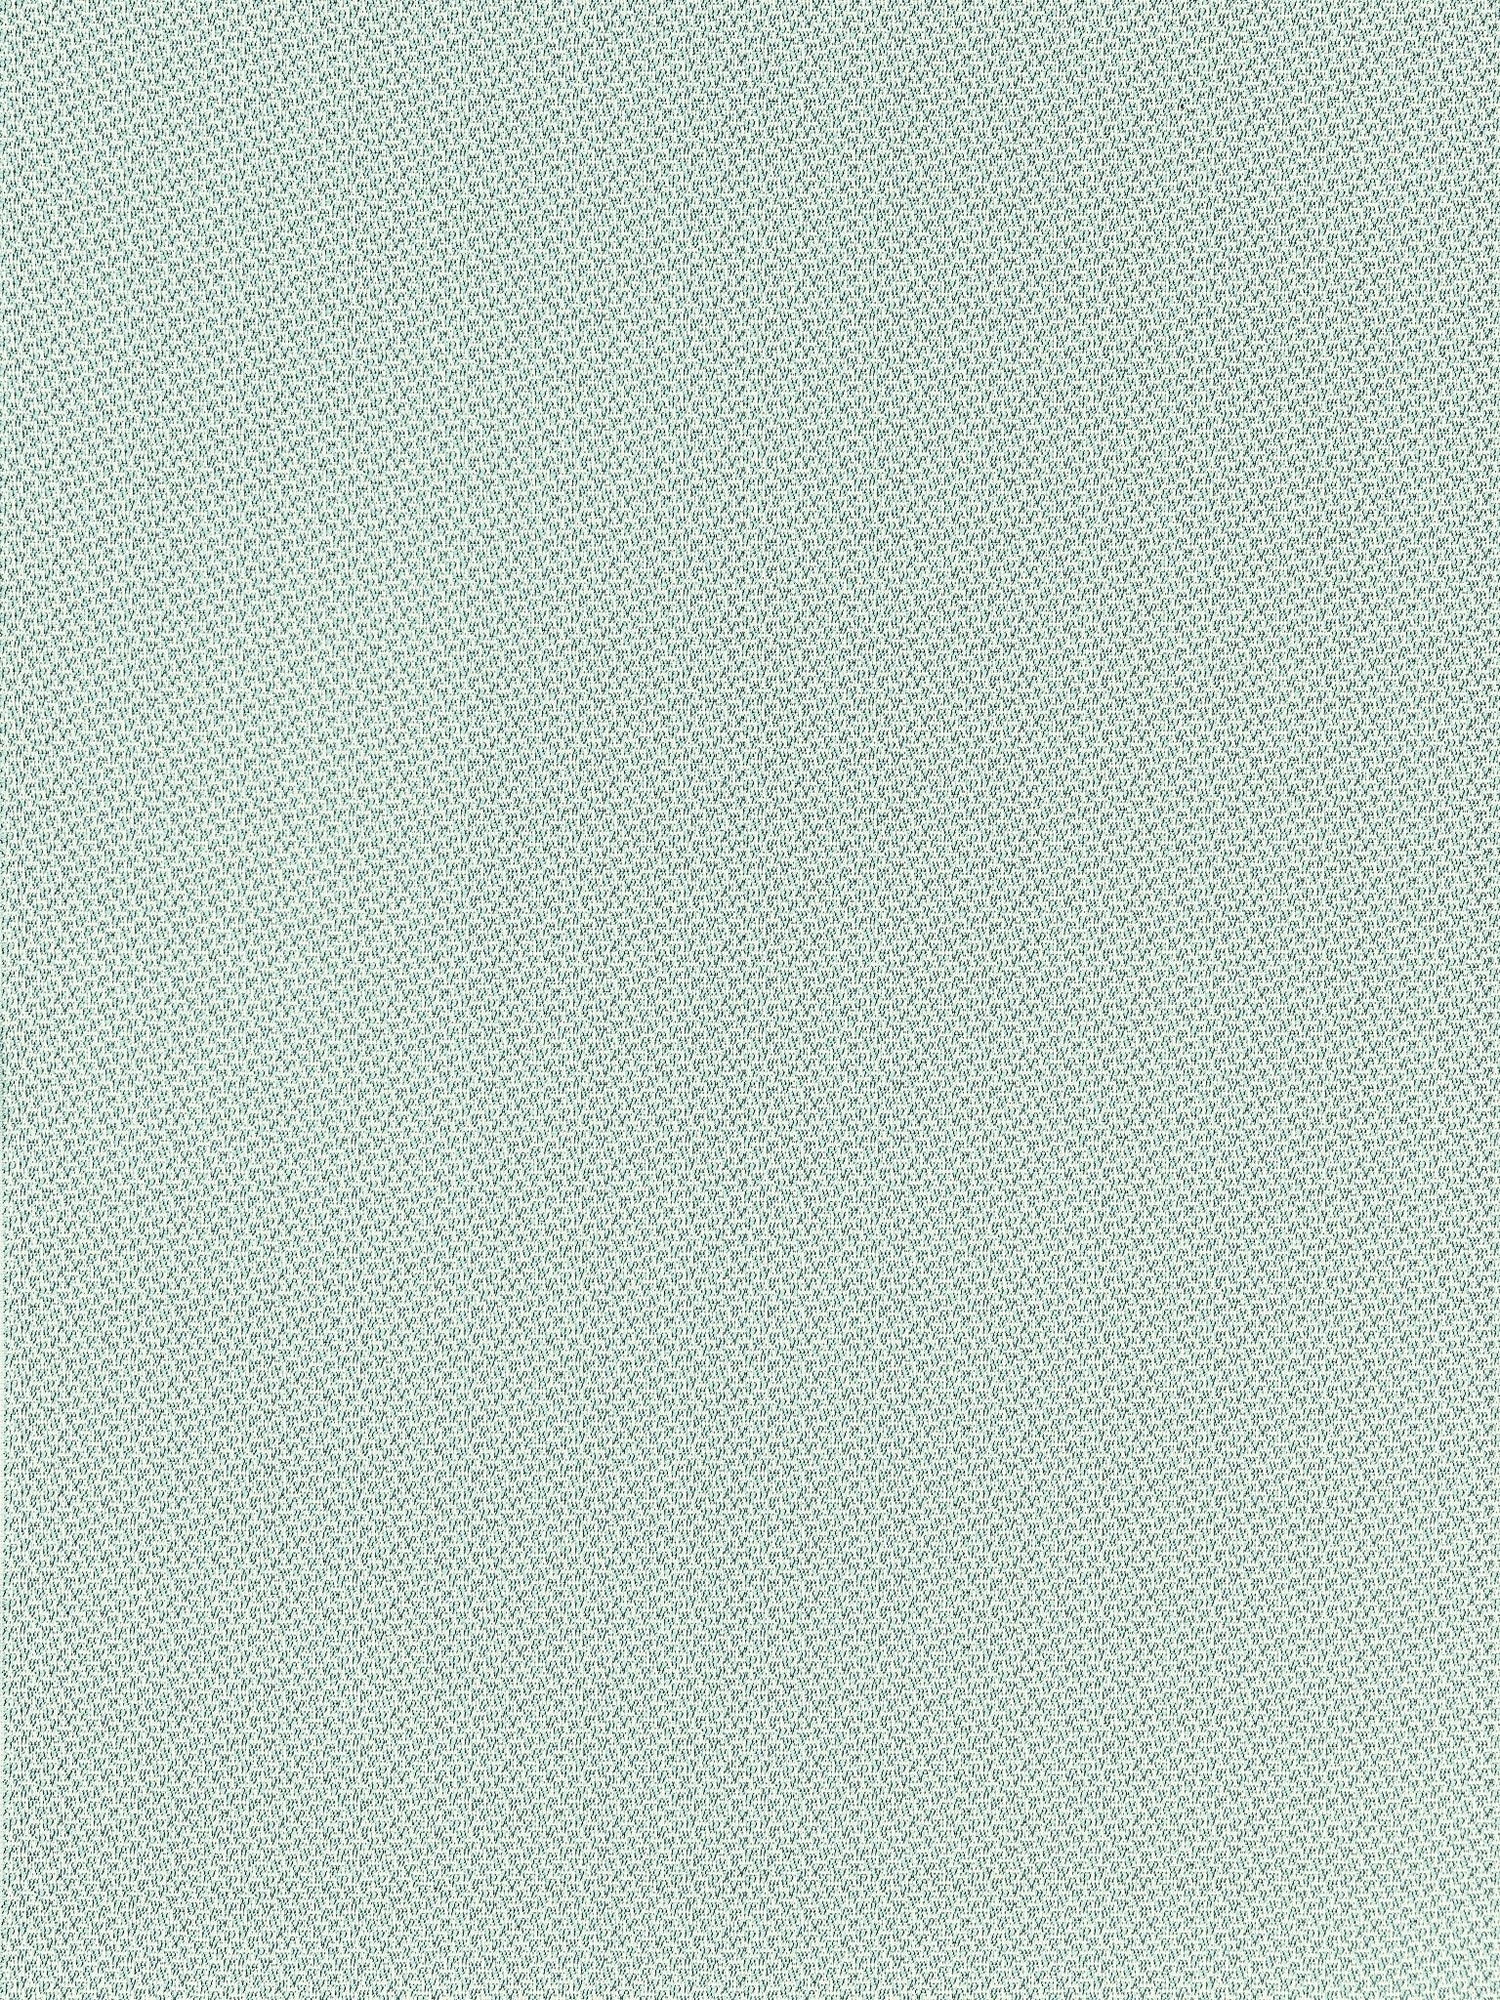 North Downs fabric in celadon color - pattern number EY 000613ND - by Scalamandre in the Old World Weavers collection